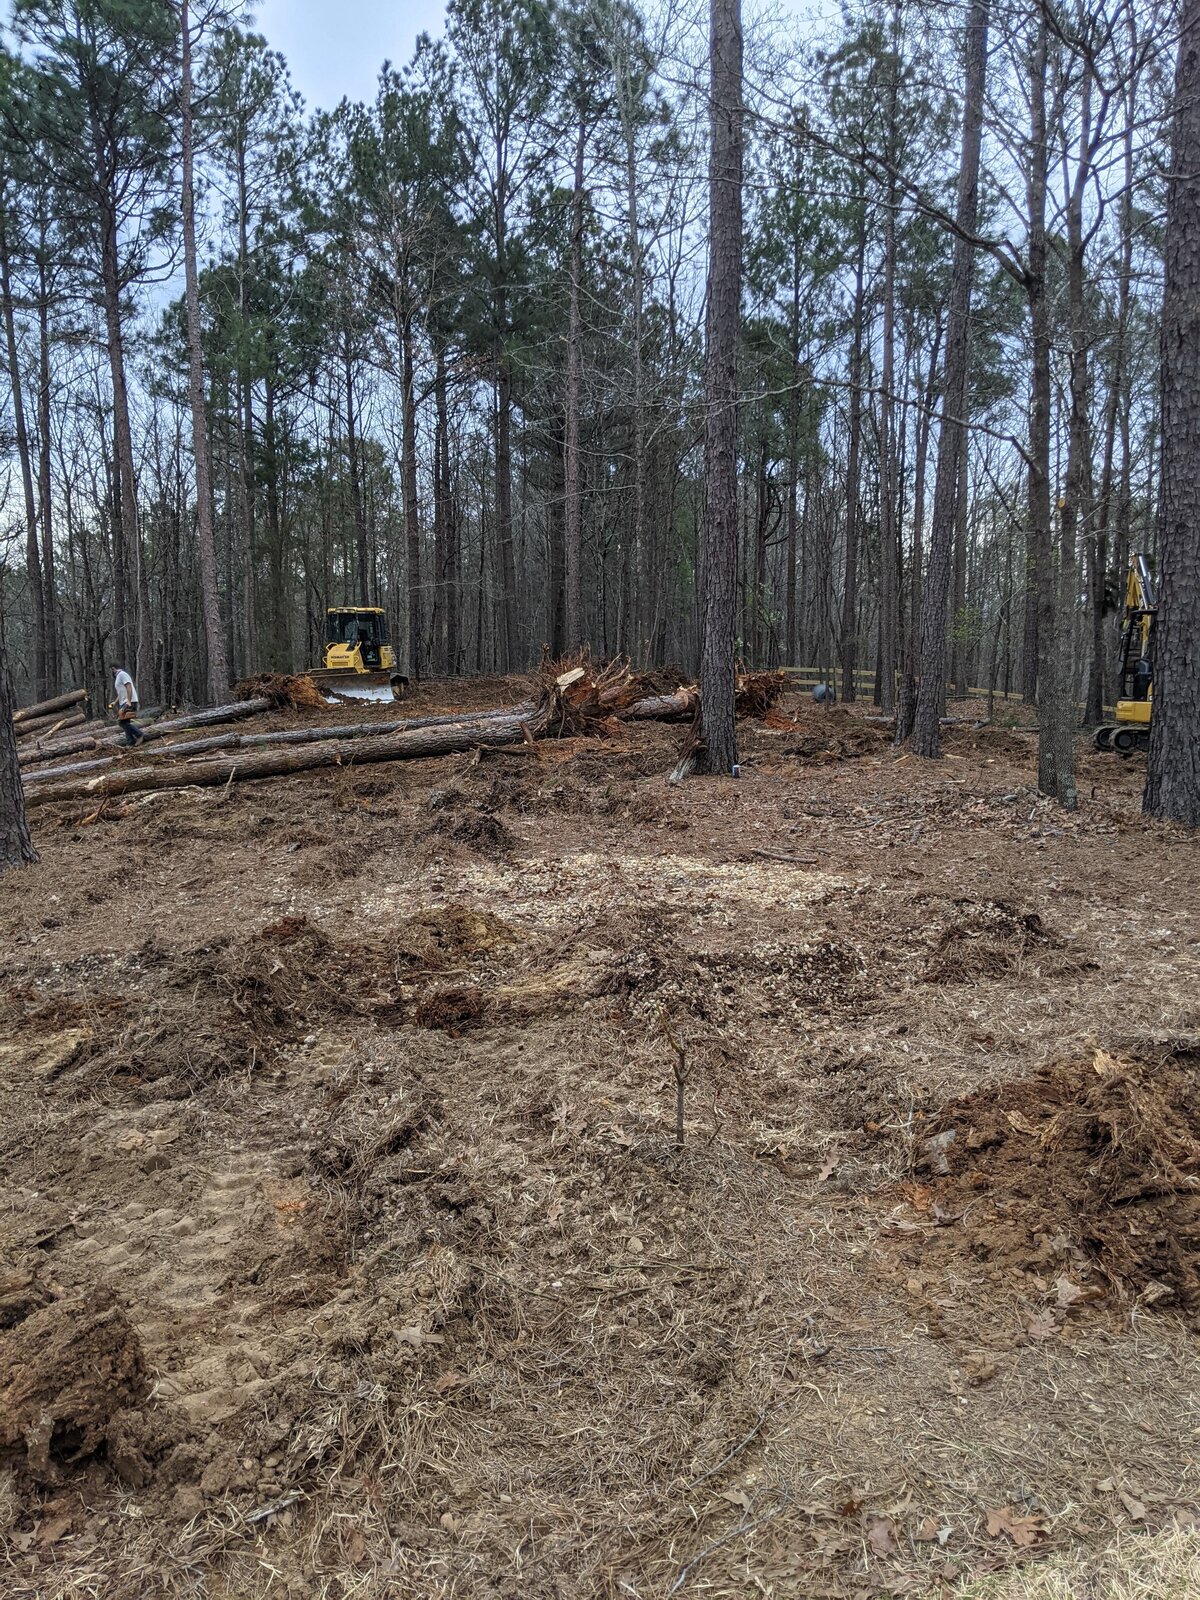 two-excavators-knocking-down-trees-in-wooded-area